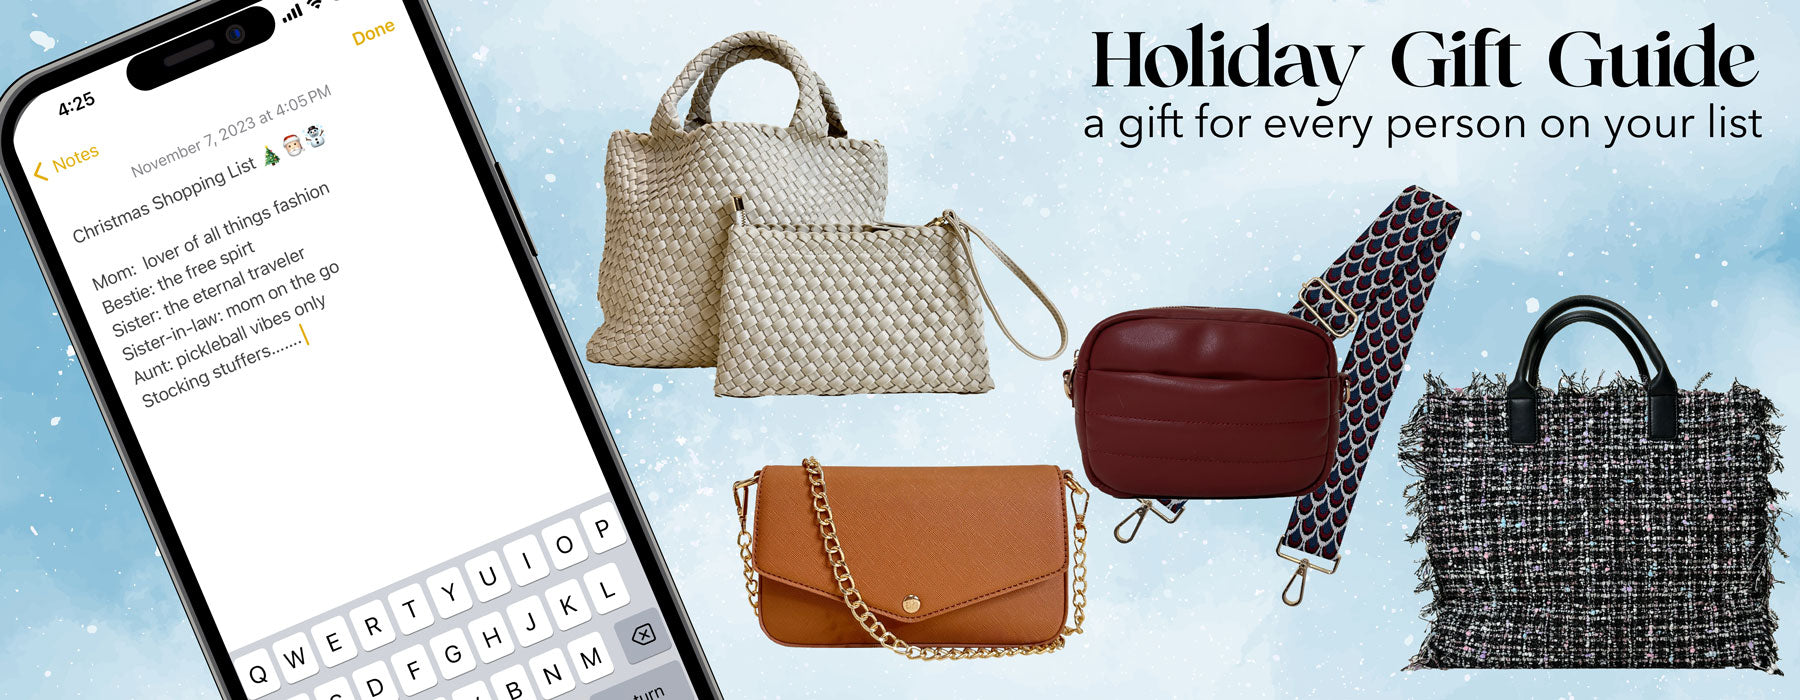 Ahdorned’s Festive Finds: Tailored Holiday Gift Ideas for Everyone